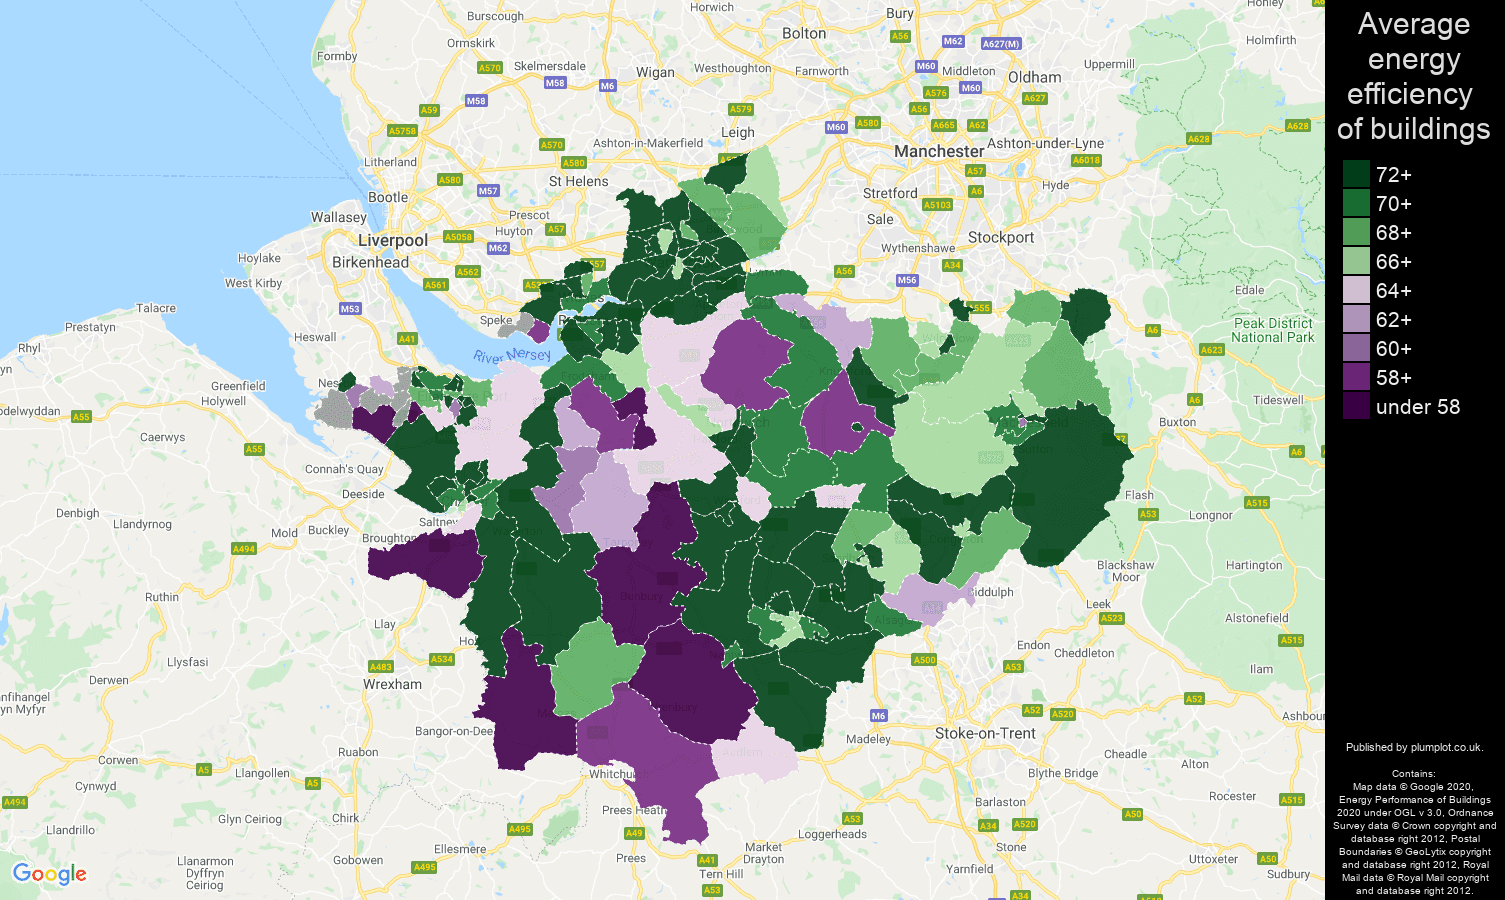 Cheshire map of energy efficiency of flats